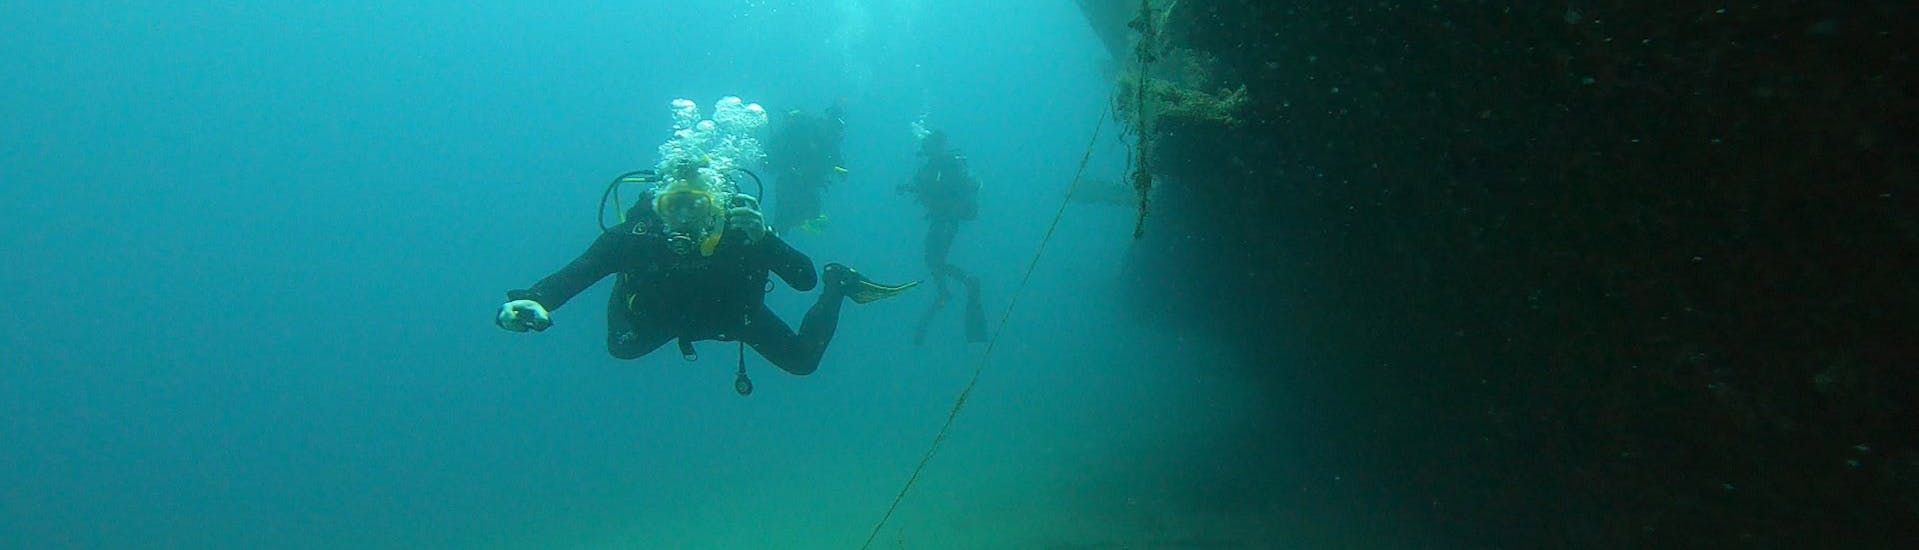 Diver on the PADI advanced open water diver course in Nea Makri hosted by Kanelakis Diving Experiences - Dimitris Kanelakis.